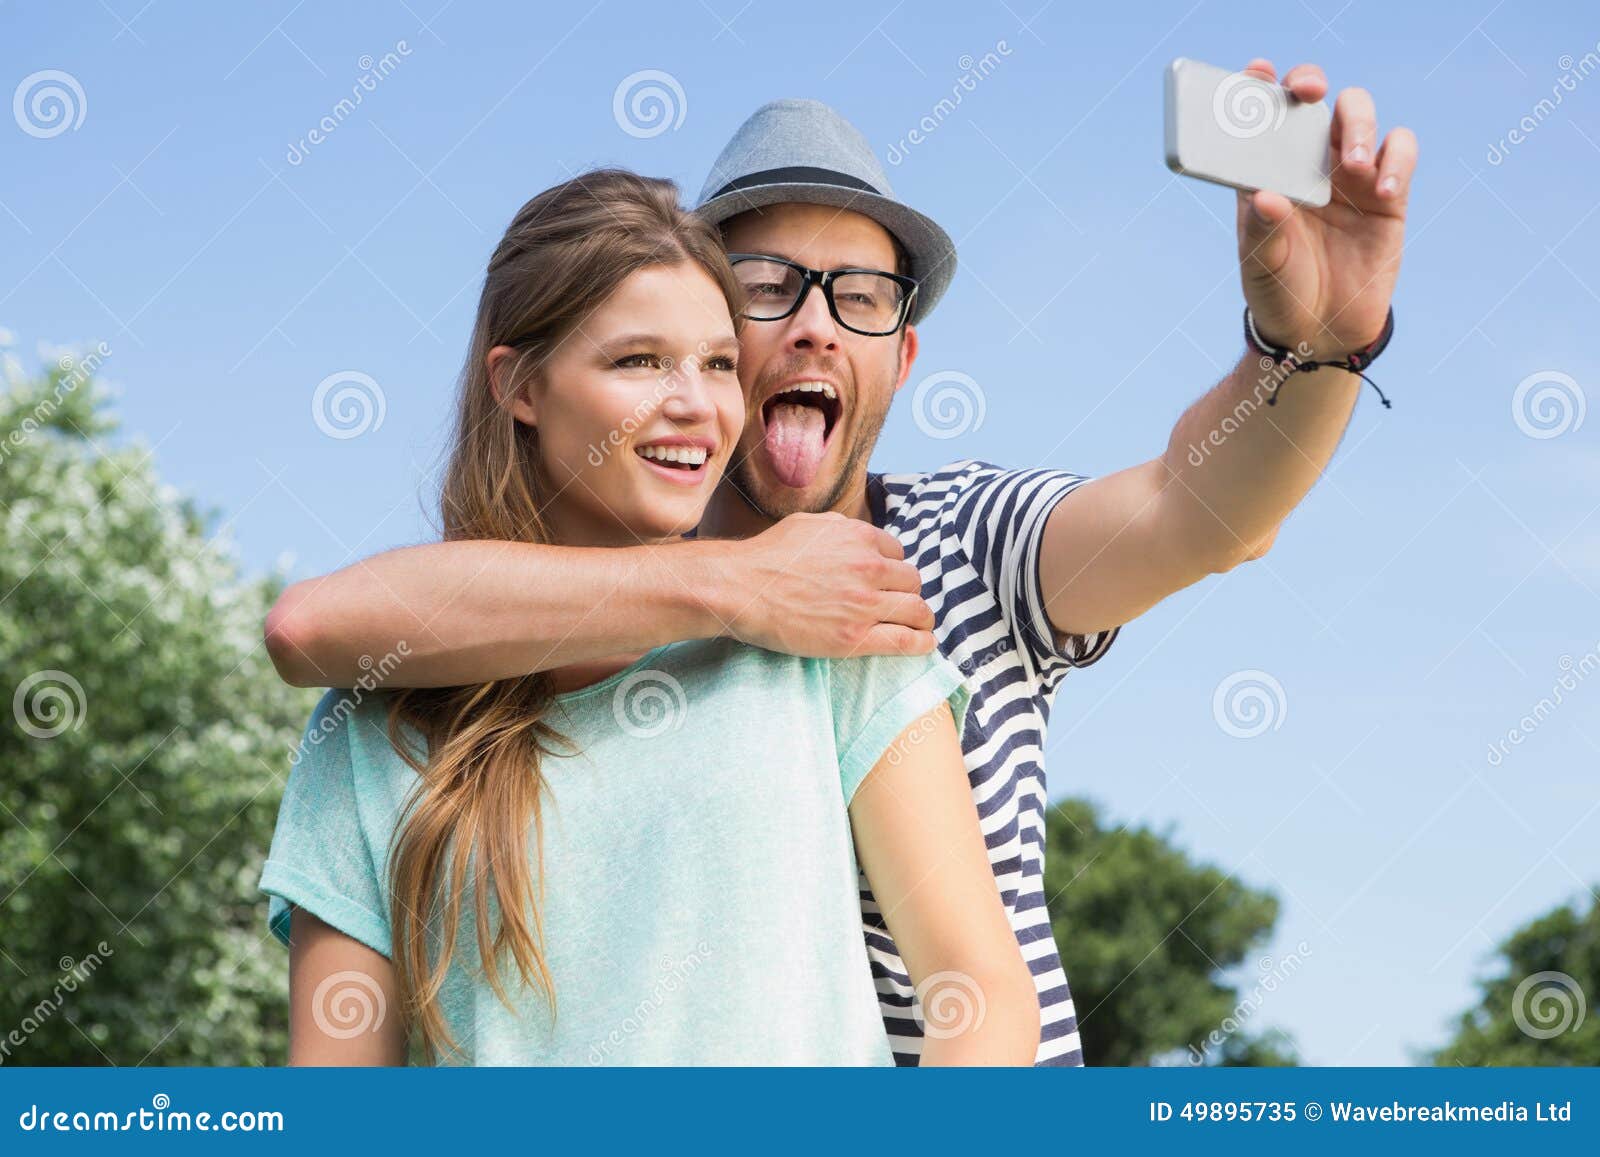 Cute Couple In The Park Taking Selfie Stock Image Image Of Handsome